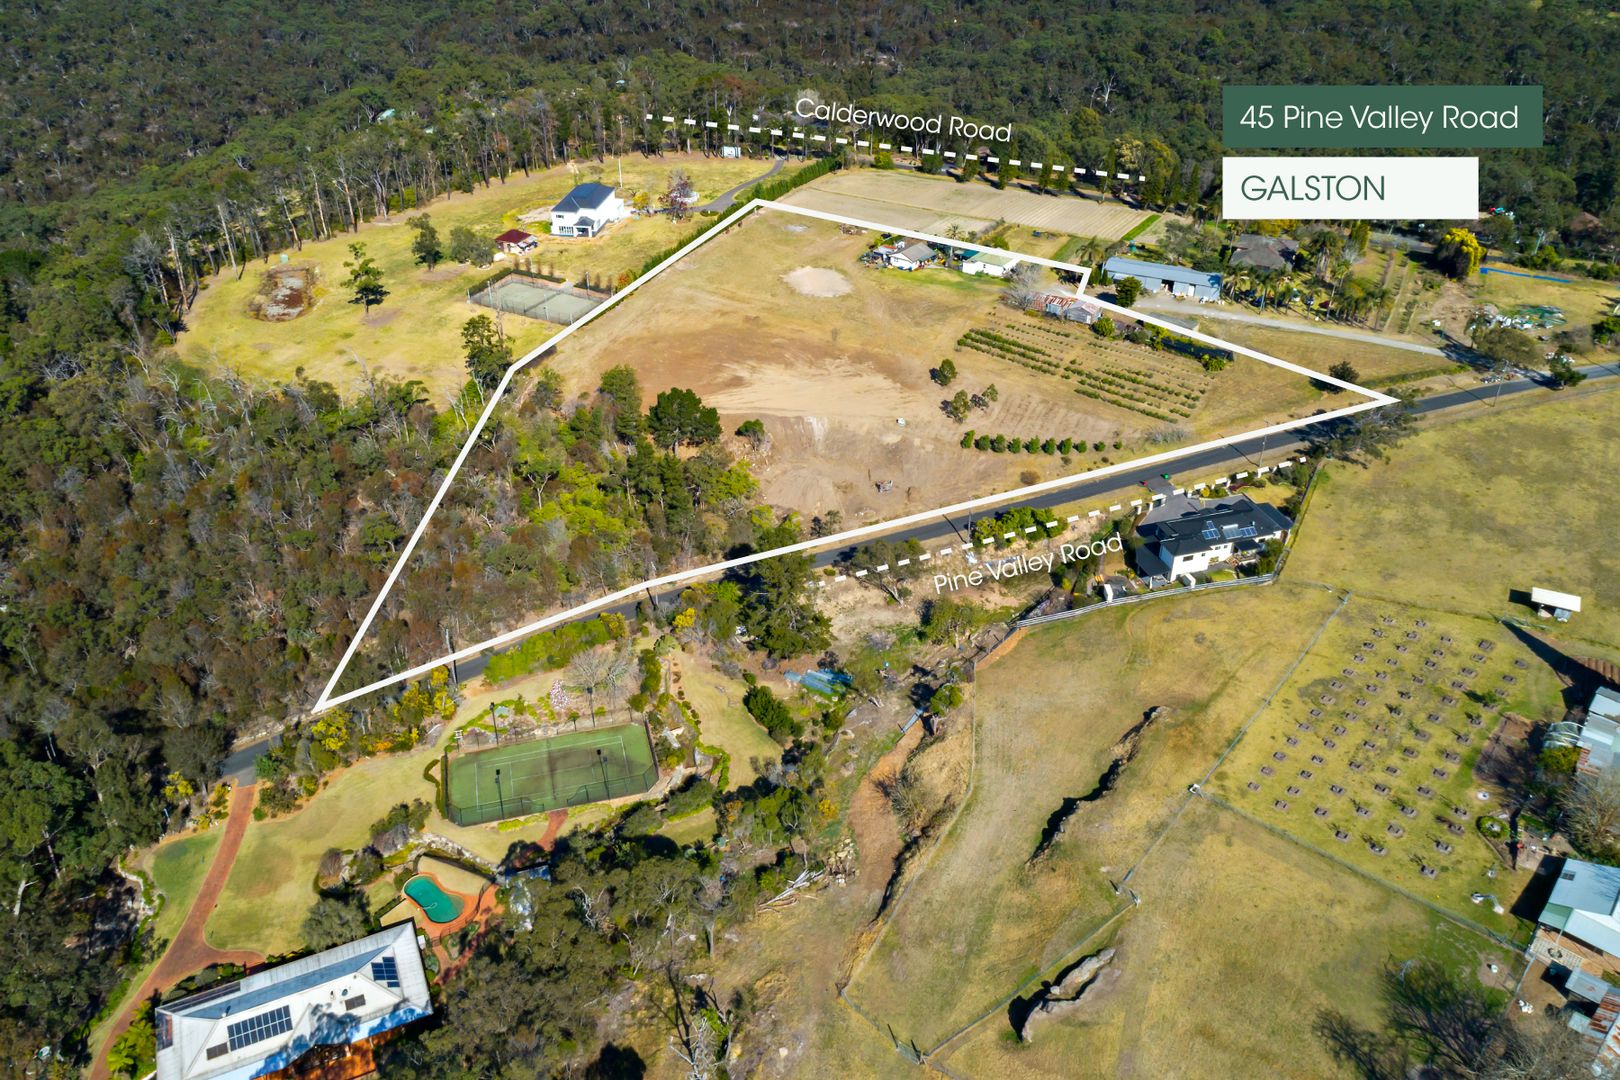 45 Pine Valley Road, Galston NSW 2159